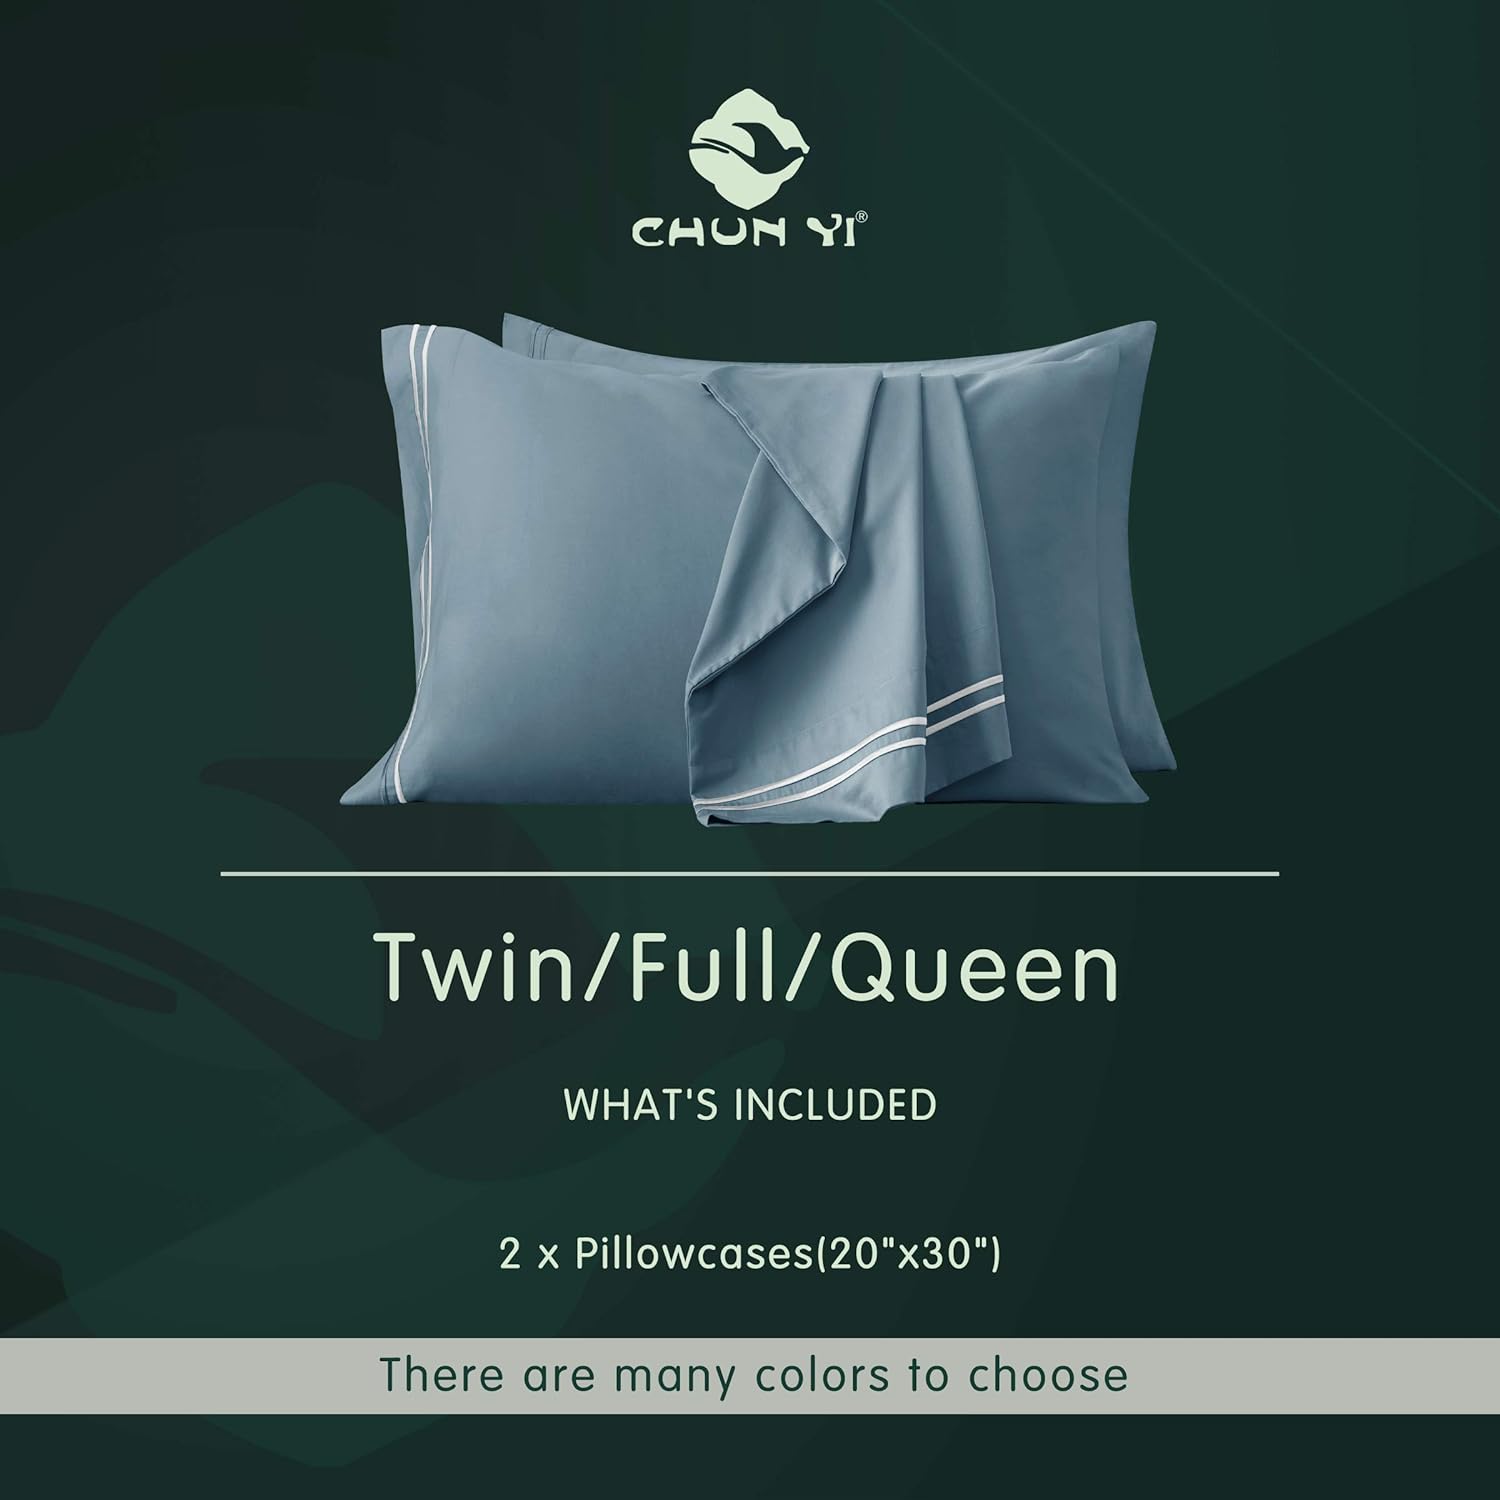 Luxury Cotton Pillowcase Set for Hair and Skin - Tencel Shams 2-Pack, Ultra-Soft Pillow Covers with Envelope Closure